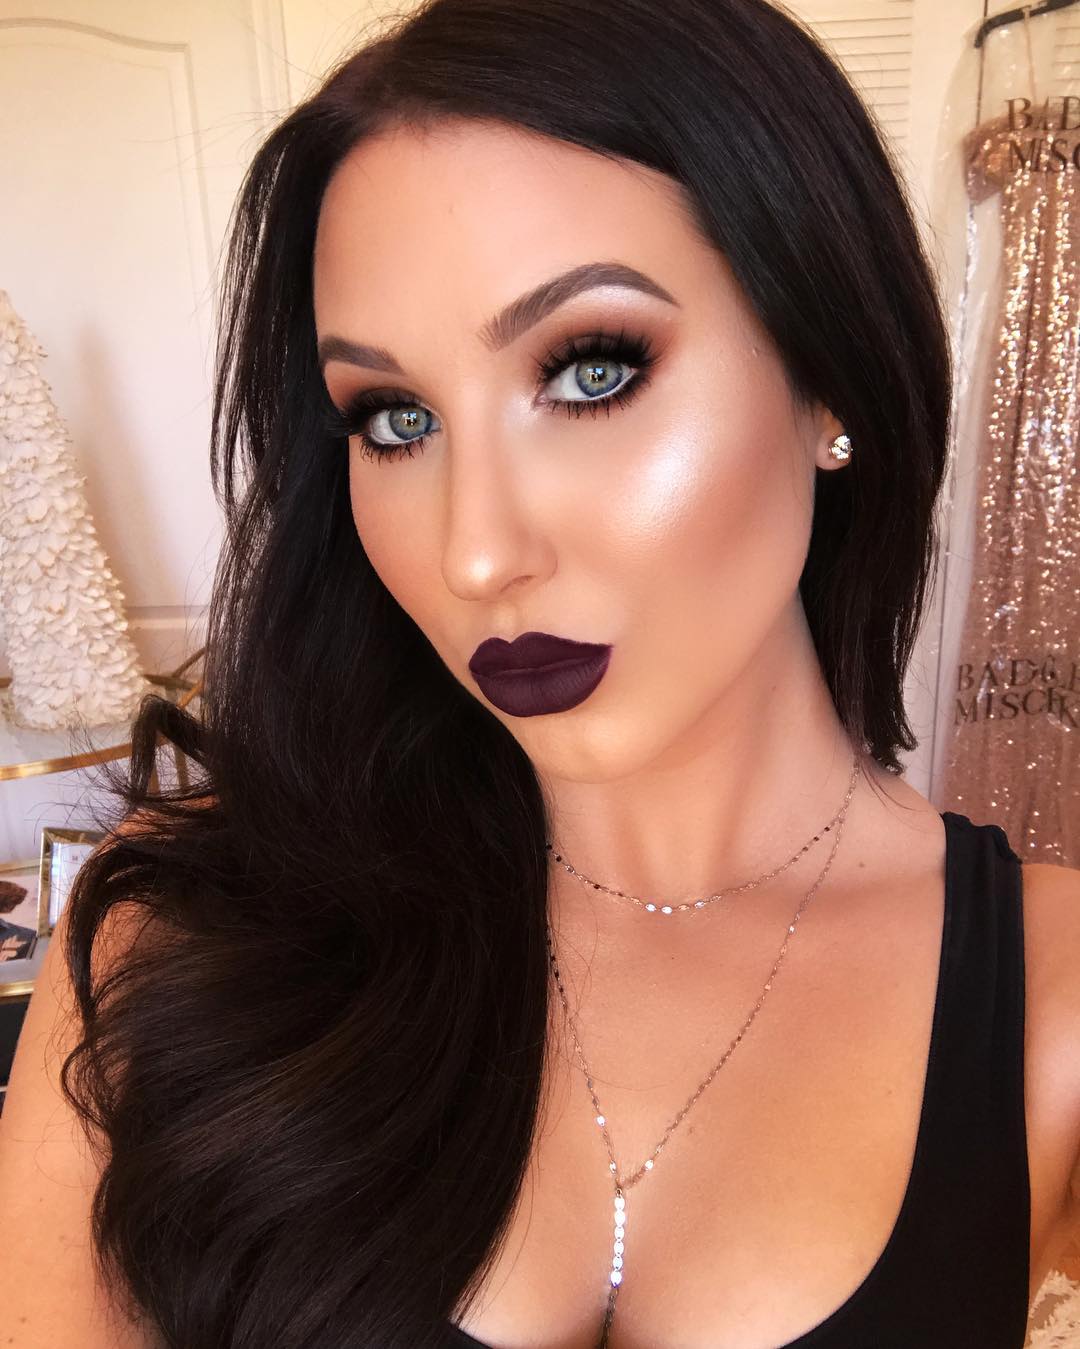 Jaclyn Hill RESPONDS To Jon Hill SHADING Her New Relationship